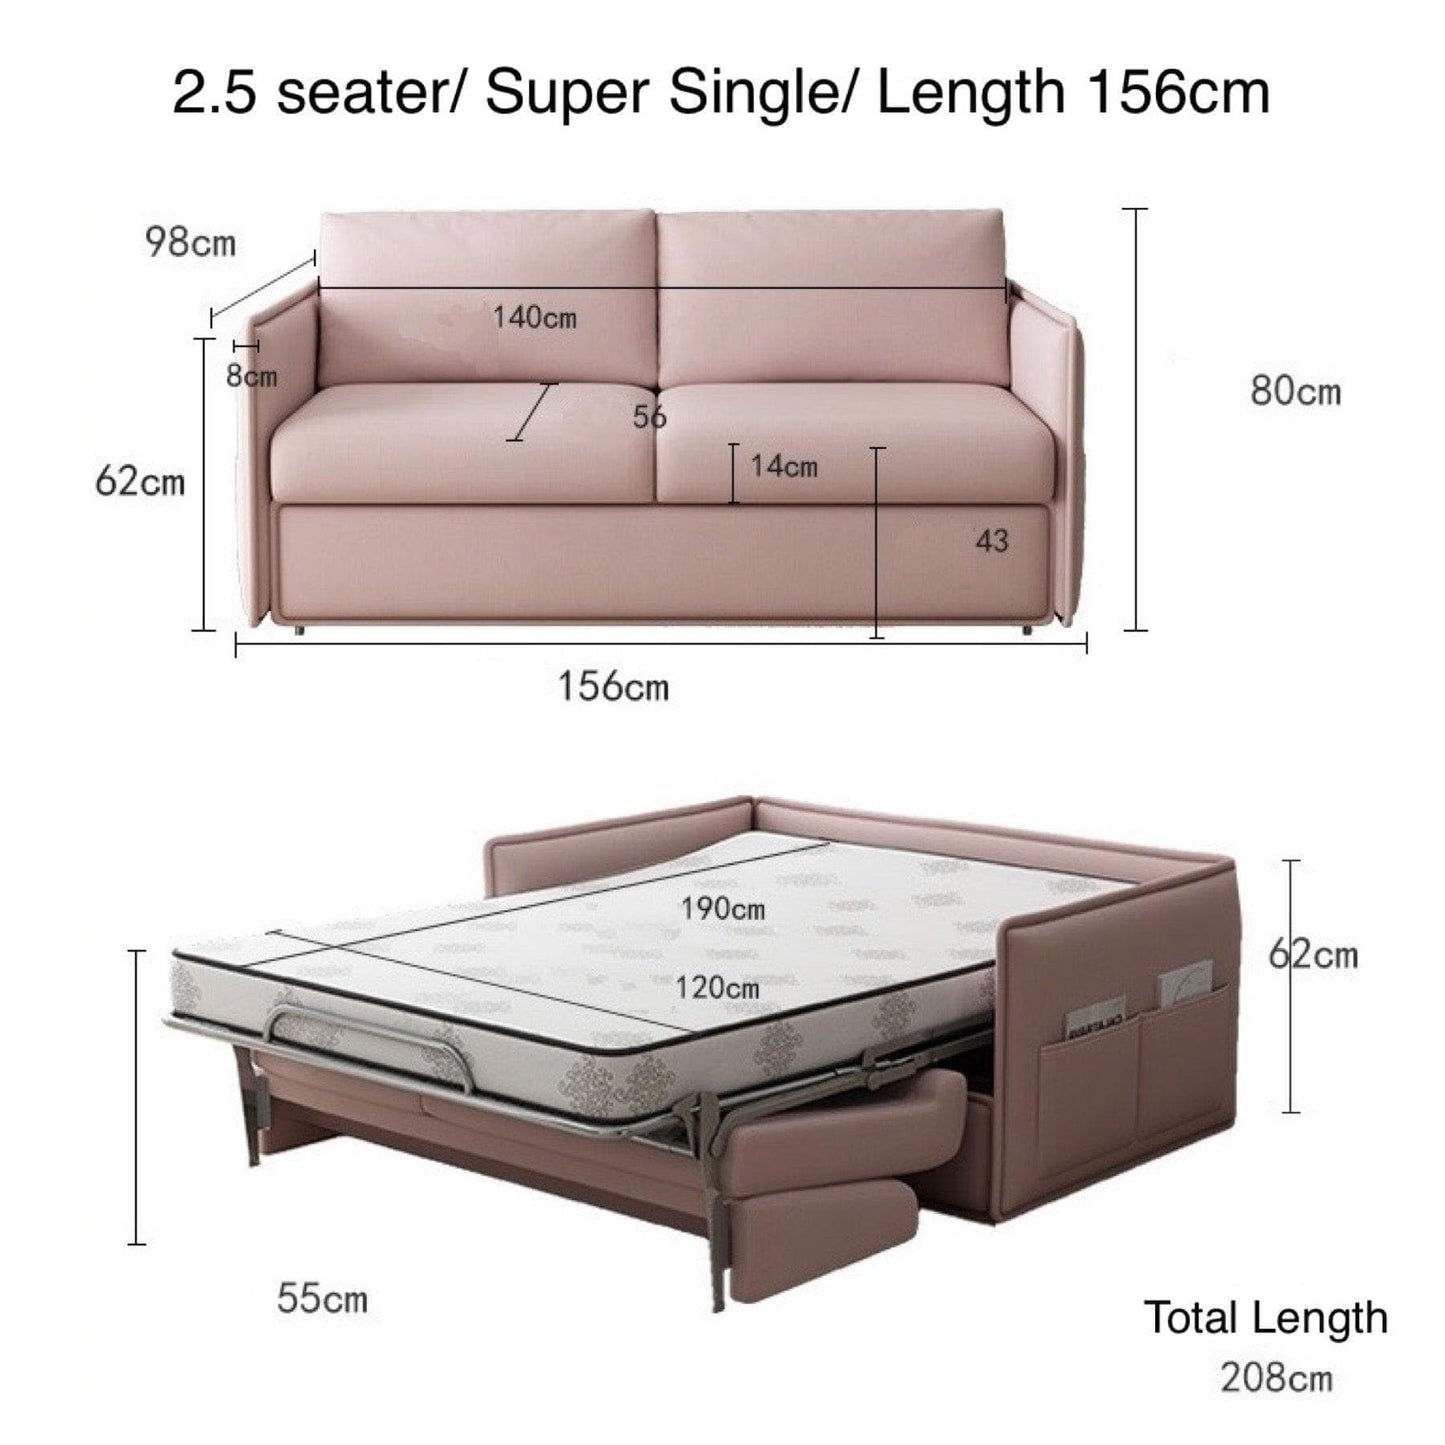 Home Atelier Cotton Linen Fabric / Super Single Size/ Length 156cm / Pink Ariel Foldable Sofa Bed with Mattress